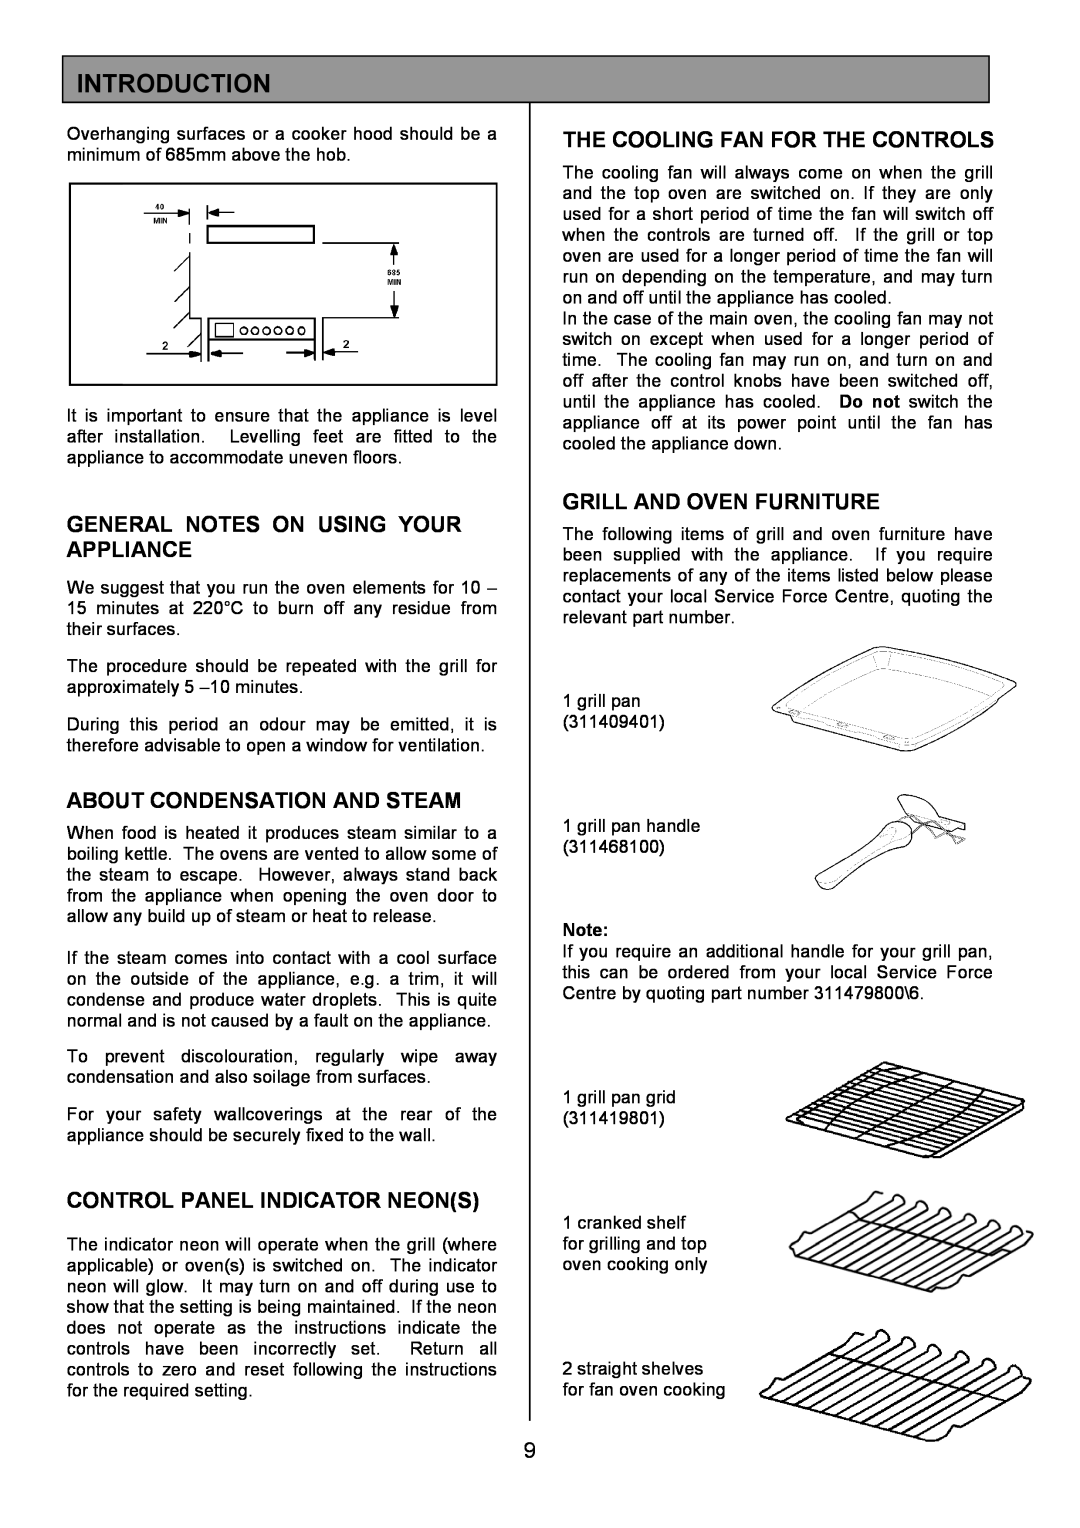 Zanussi ZCE 8021 manual General Notes On Using Your Appliance, About Condensation And Steam, Control Panel Indicator Neons 